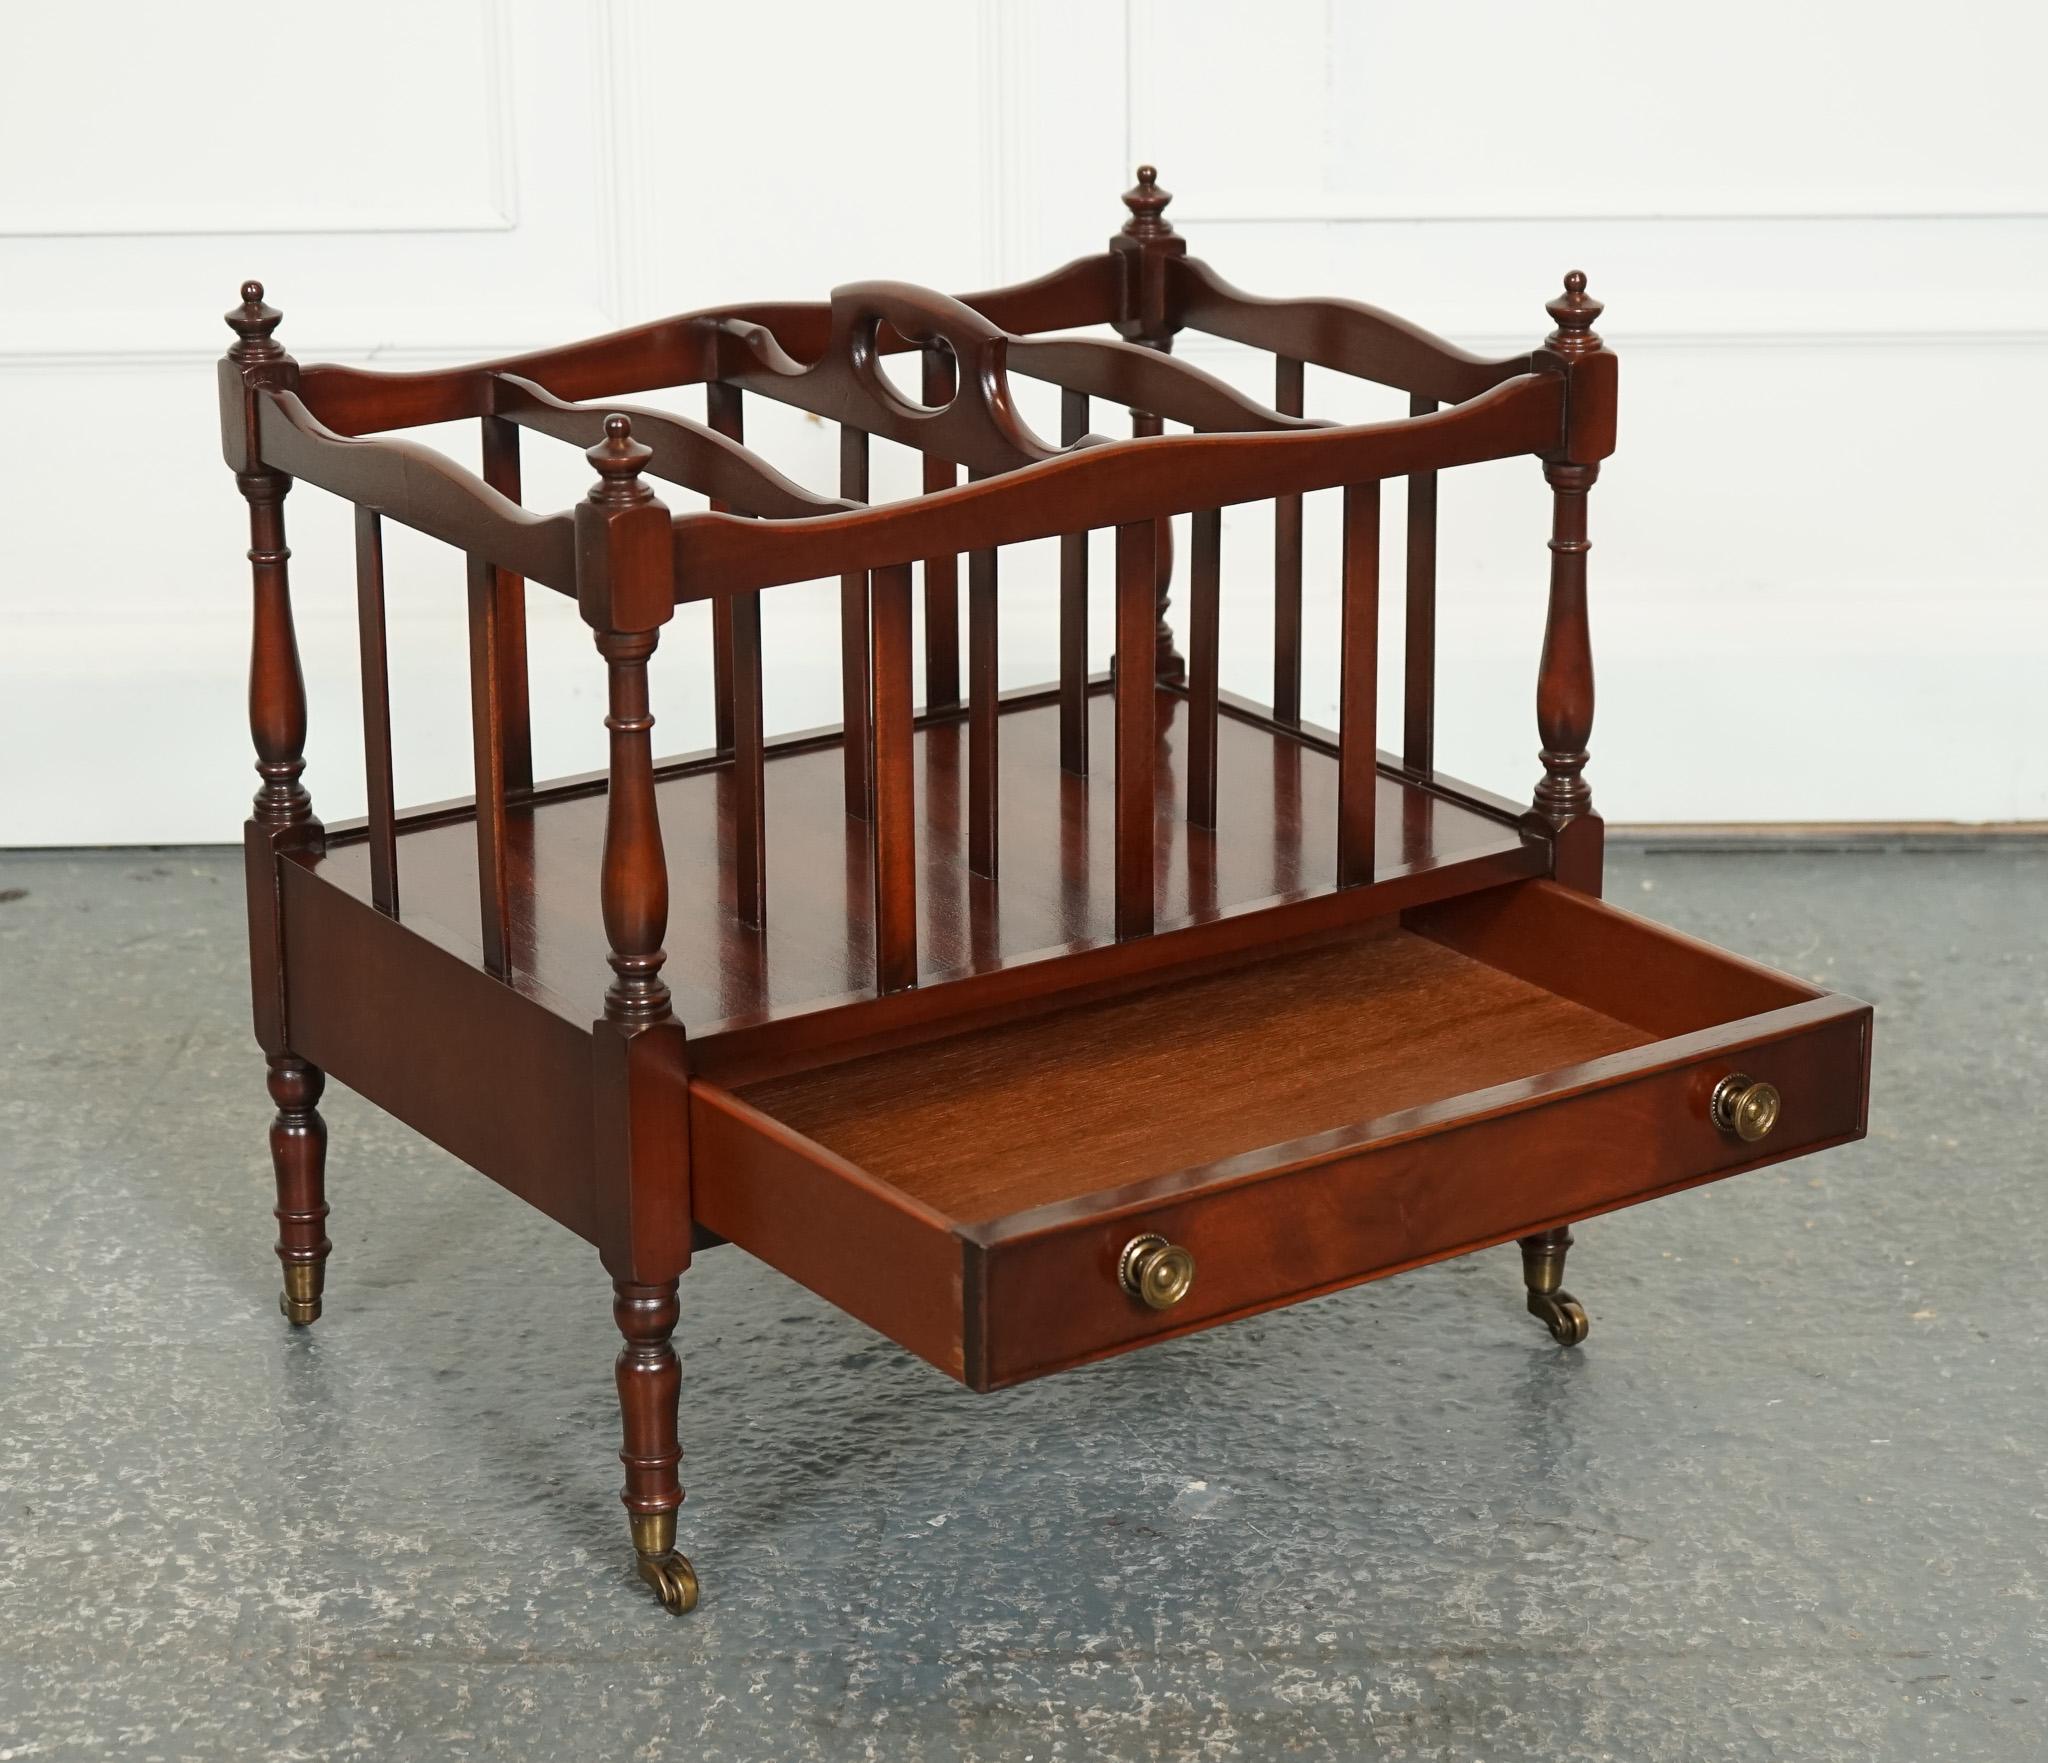 We are delighted to offer for sale this Lovely Vintage Canterbury Magazine Rack.

A gorgeous vintage mahogany Canterbury newspaper rack is a timeless piece that exudes elegance and sophistication. This Canterbury, also known as a music or magazine